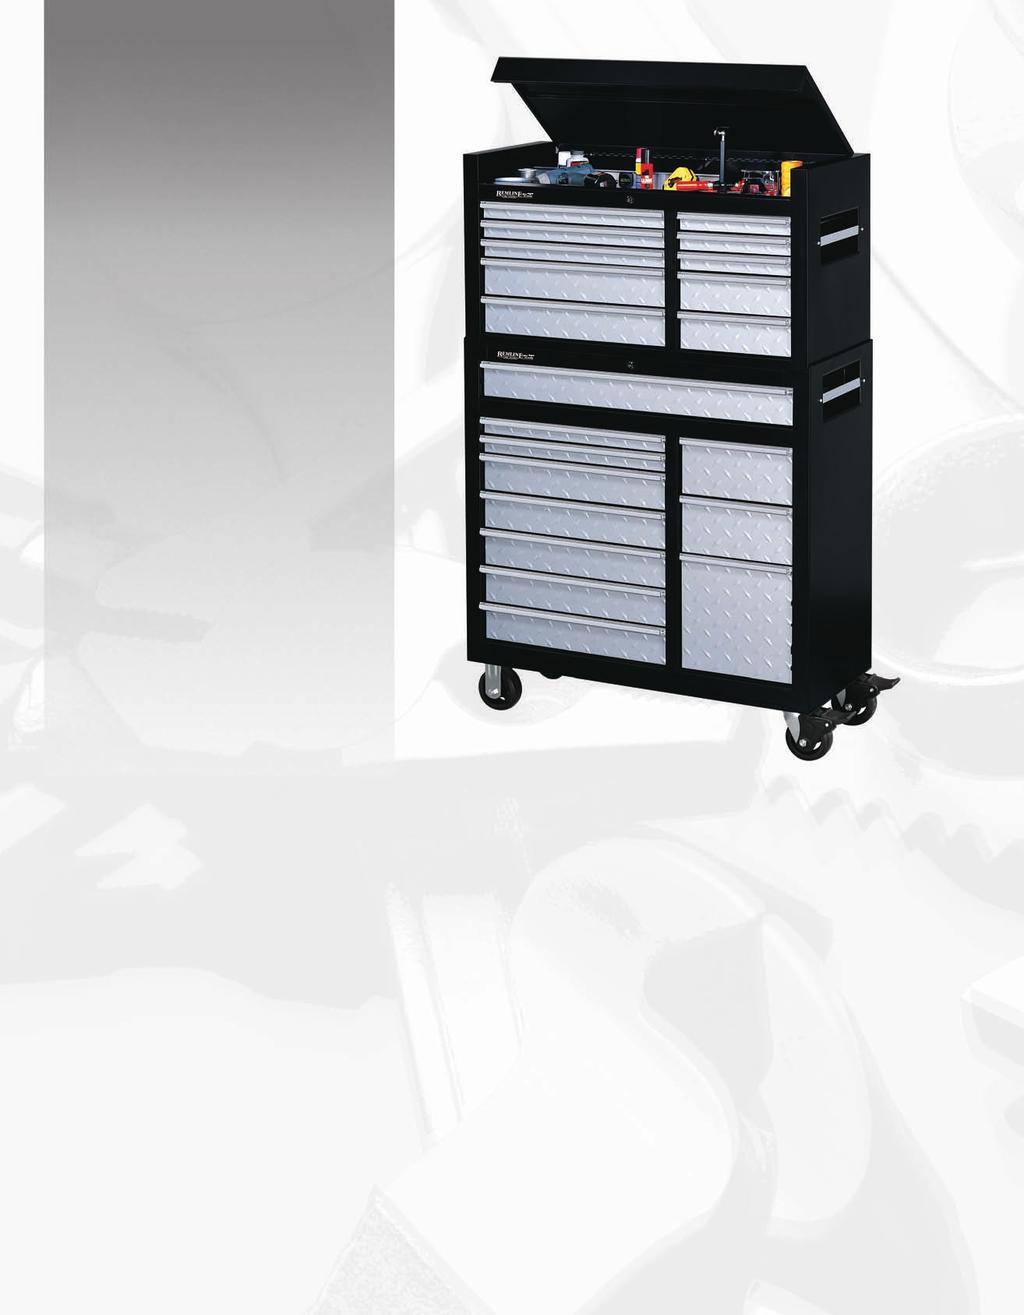 Treadplate Chests and Cabinets 41" x 18" Chest/Cabinet Features Include: All steel construction with steel double walls for more strength and greater durability.